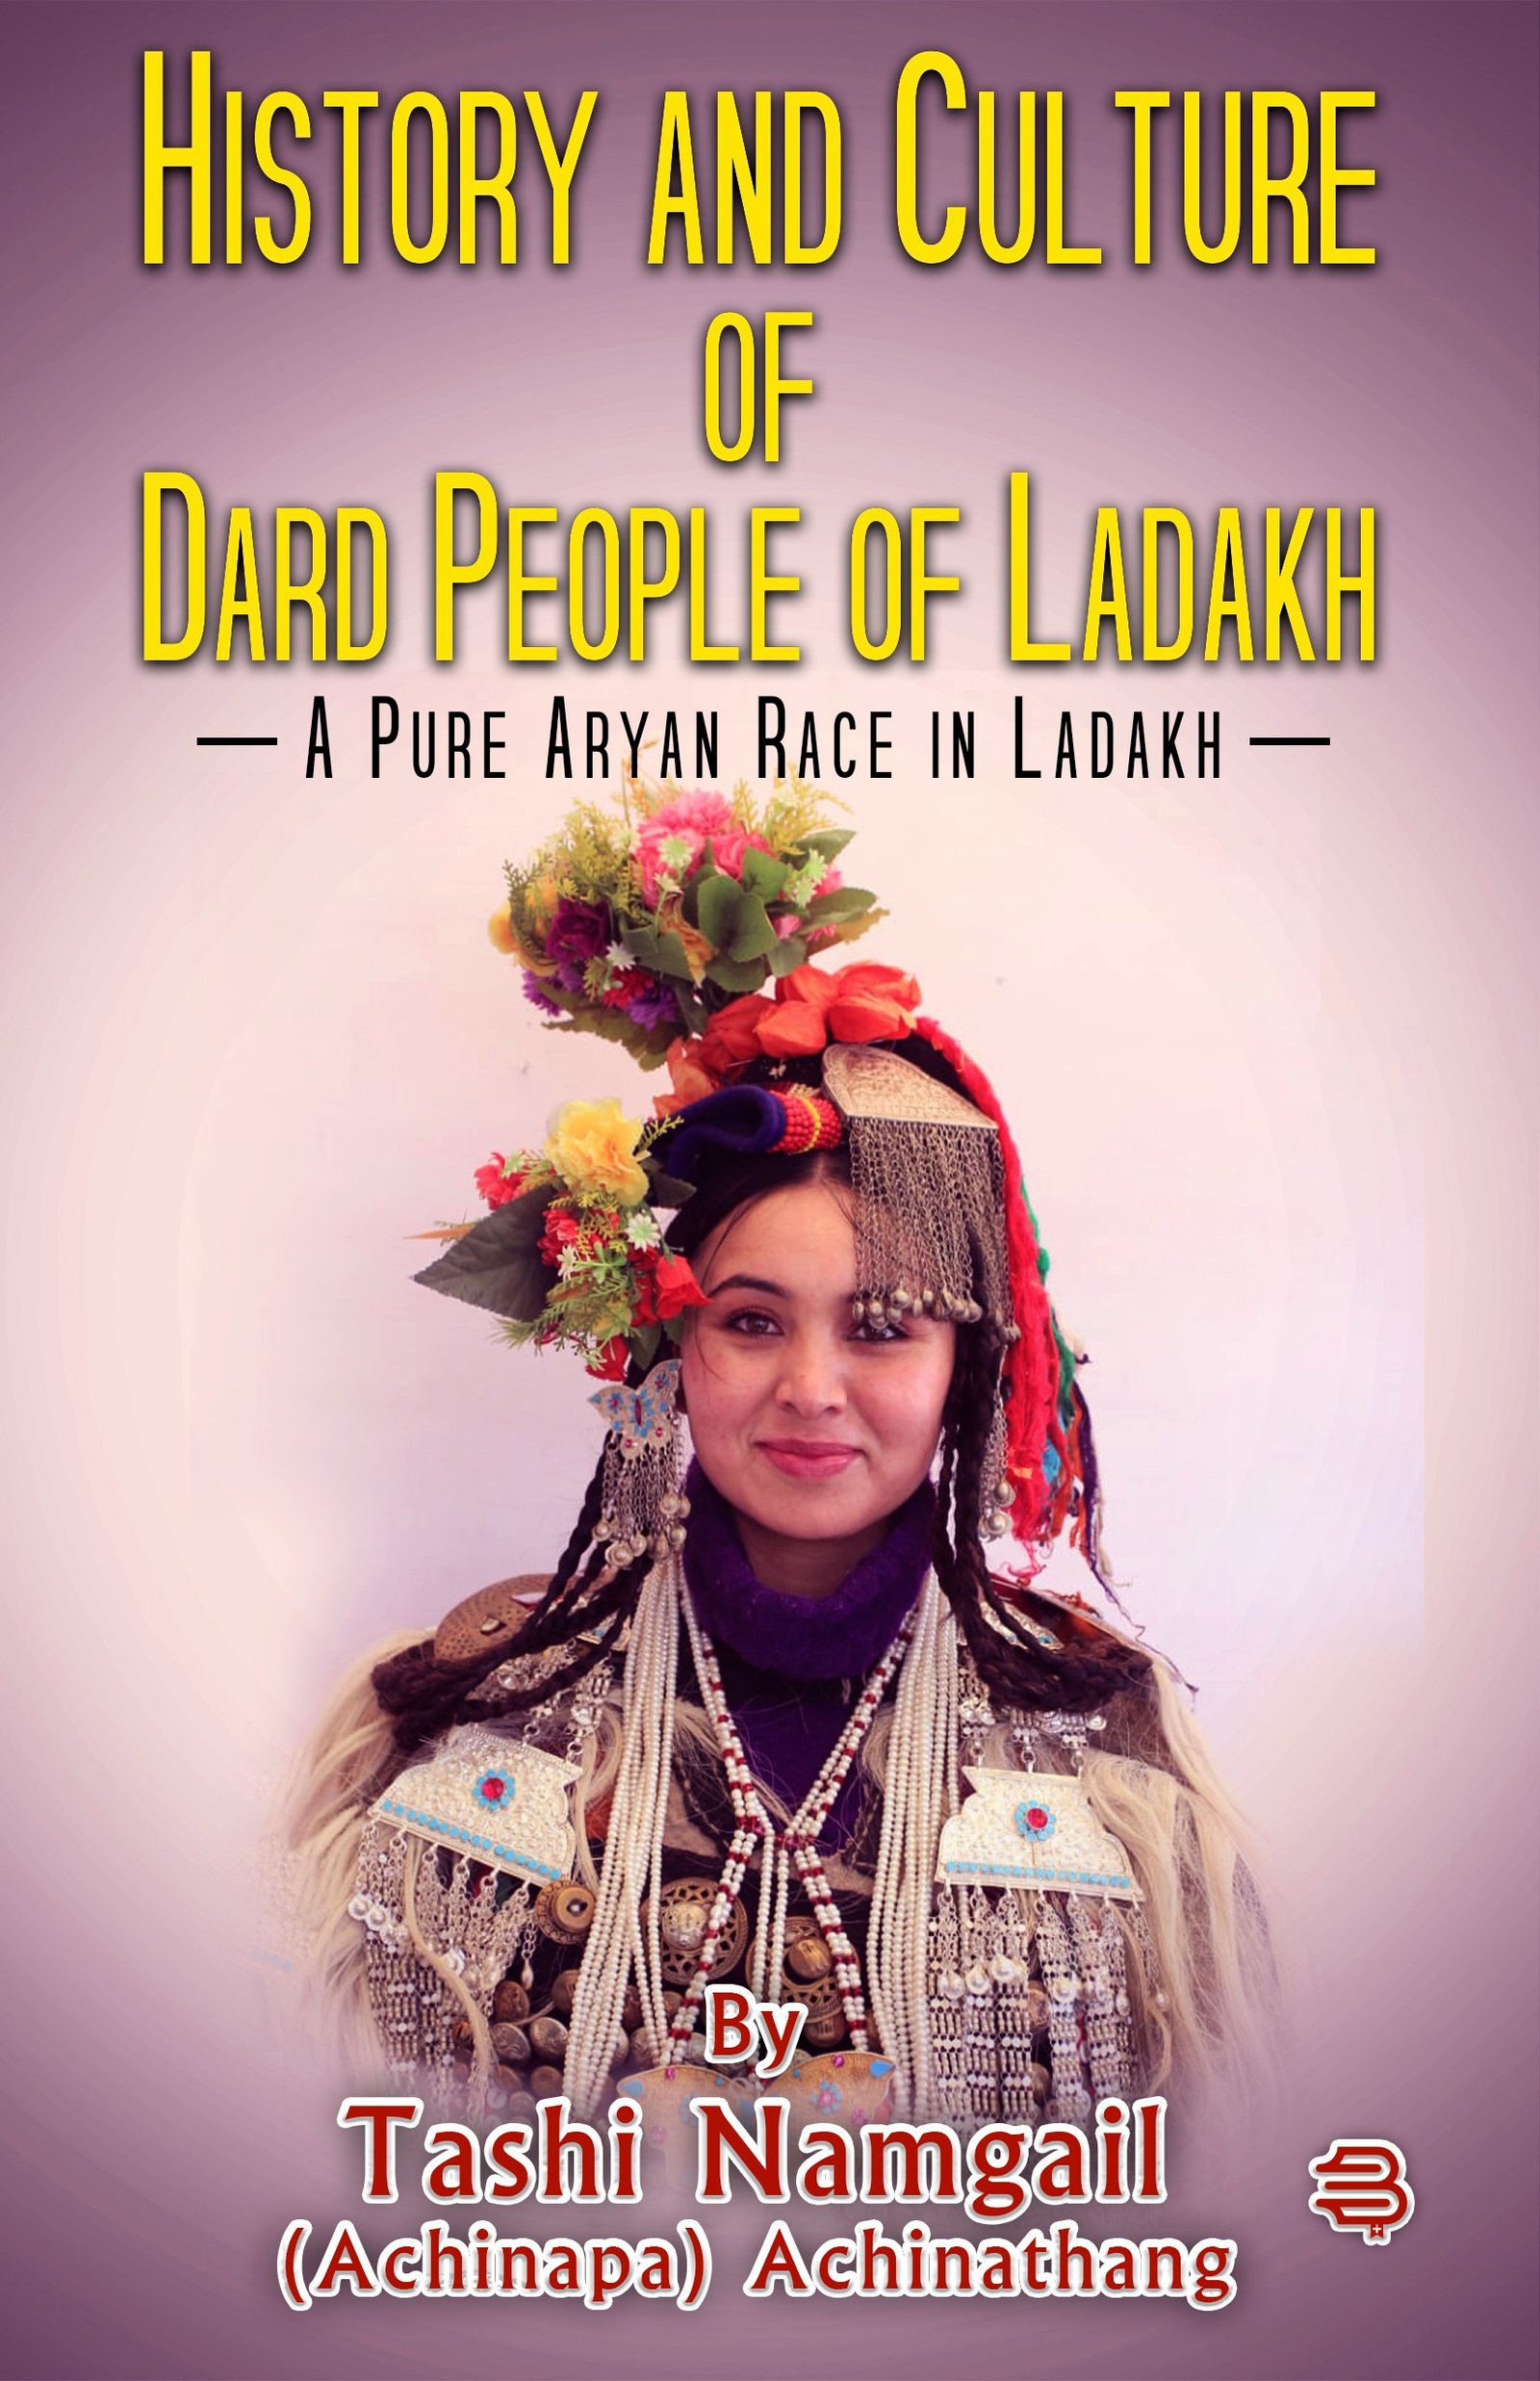 HISTORY AND CULTURE OF DARD PEOPLE OF LADAKH , A PURE ARYAN RACE IN LADAKH BY (	Tashi Namgail)